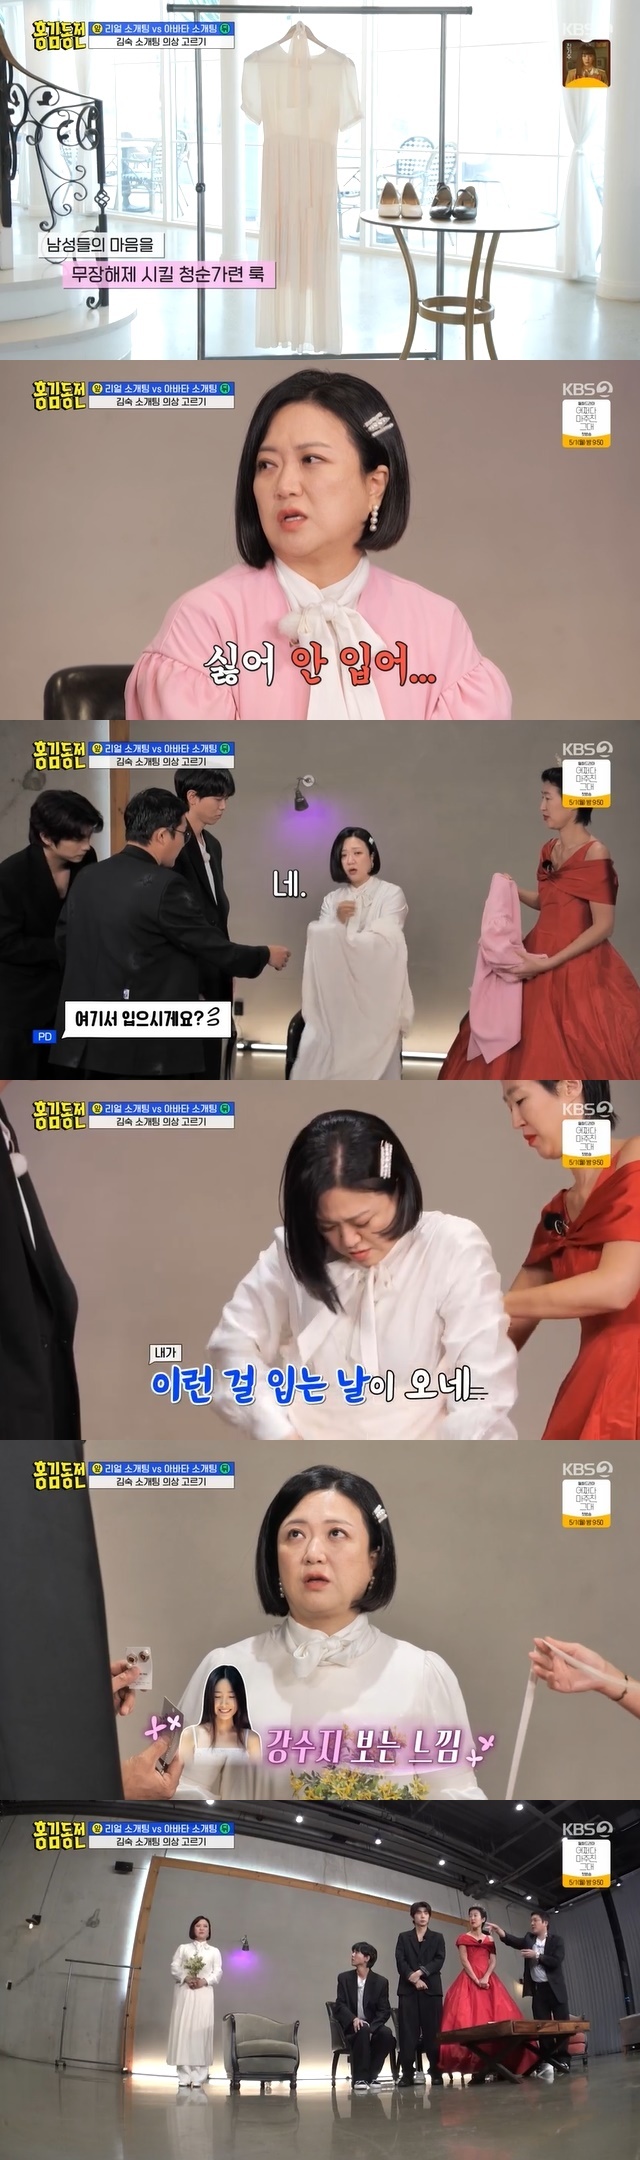 Kim Sook Top Model on innocent One Piece for the first time for blind dateIn the 34th KBS 2TV entertainment hong kim-dongjeon broadcast on April 27, Kim Sooks blind date was followed by Joo Woo-jae and Jo Se-ho last week.Before Kim Sooks blind date on the day, the crew took out Kim Sooks blind date costumes that had been prepared in advance. The first thing that came out was the one piece of blind date.As soon as Kim Sook saw it, he said, Its a pajamas. He responded, I do not like it. Its small to me.